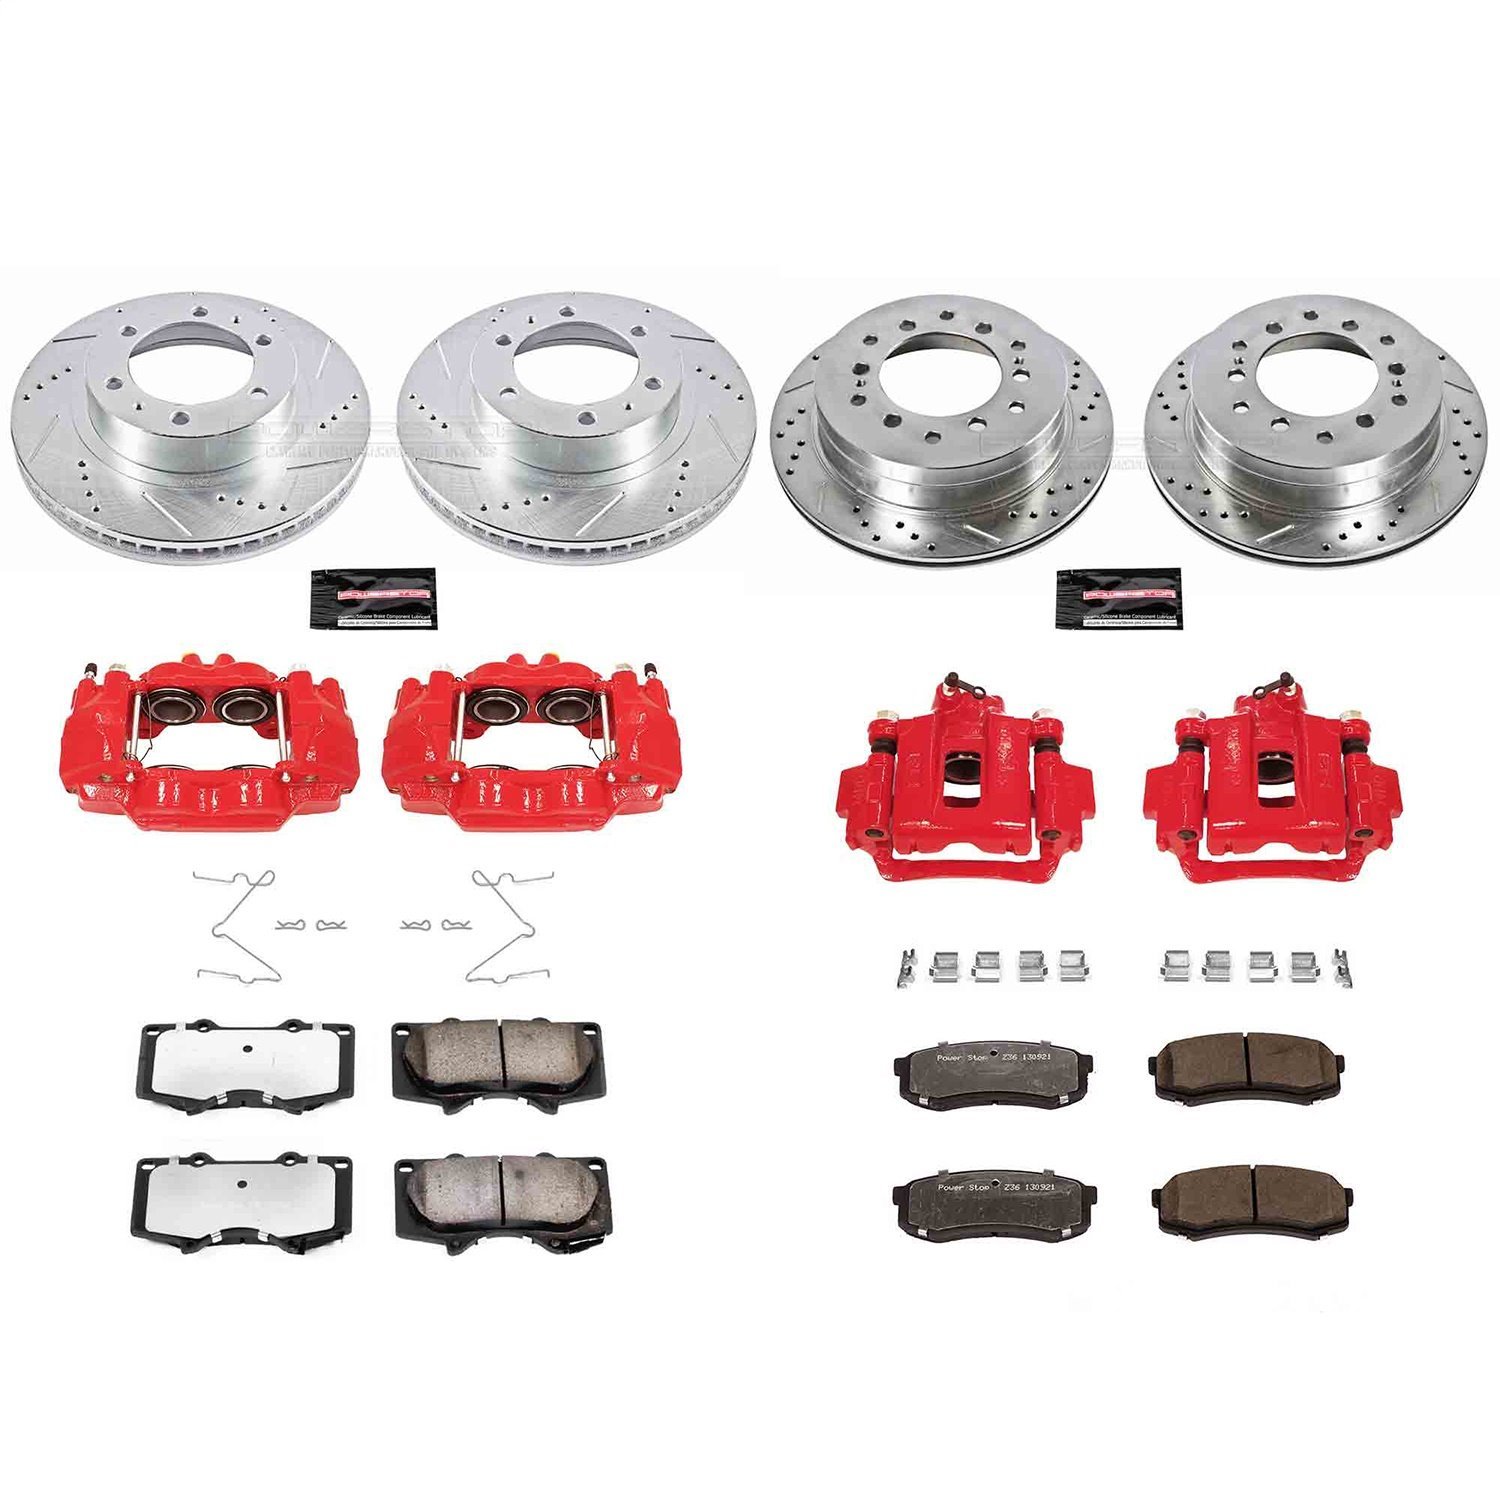 Truck and Tow Z36 Front/Rear Brake Pad, Rotor and Caliper Kit